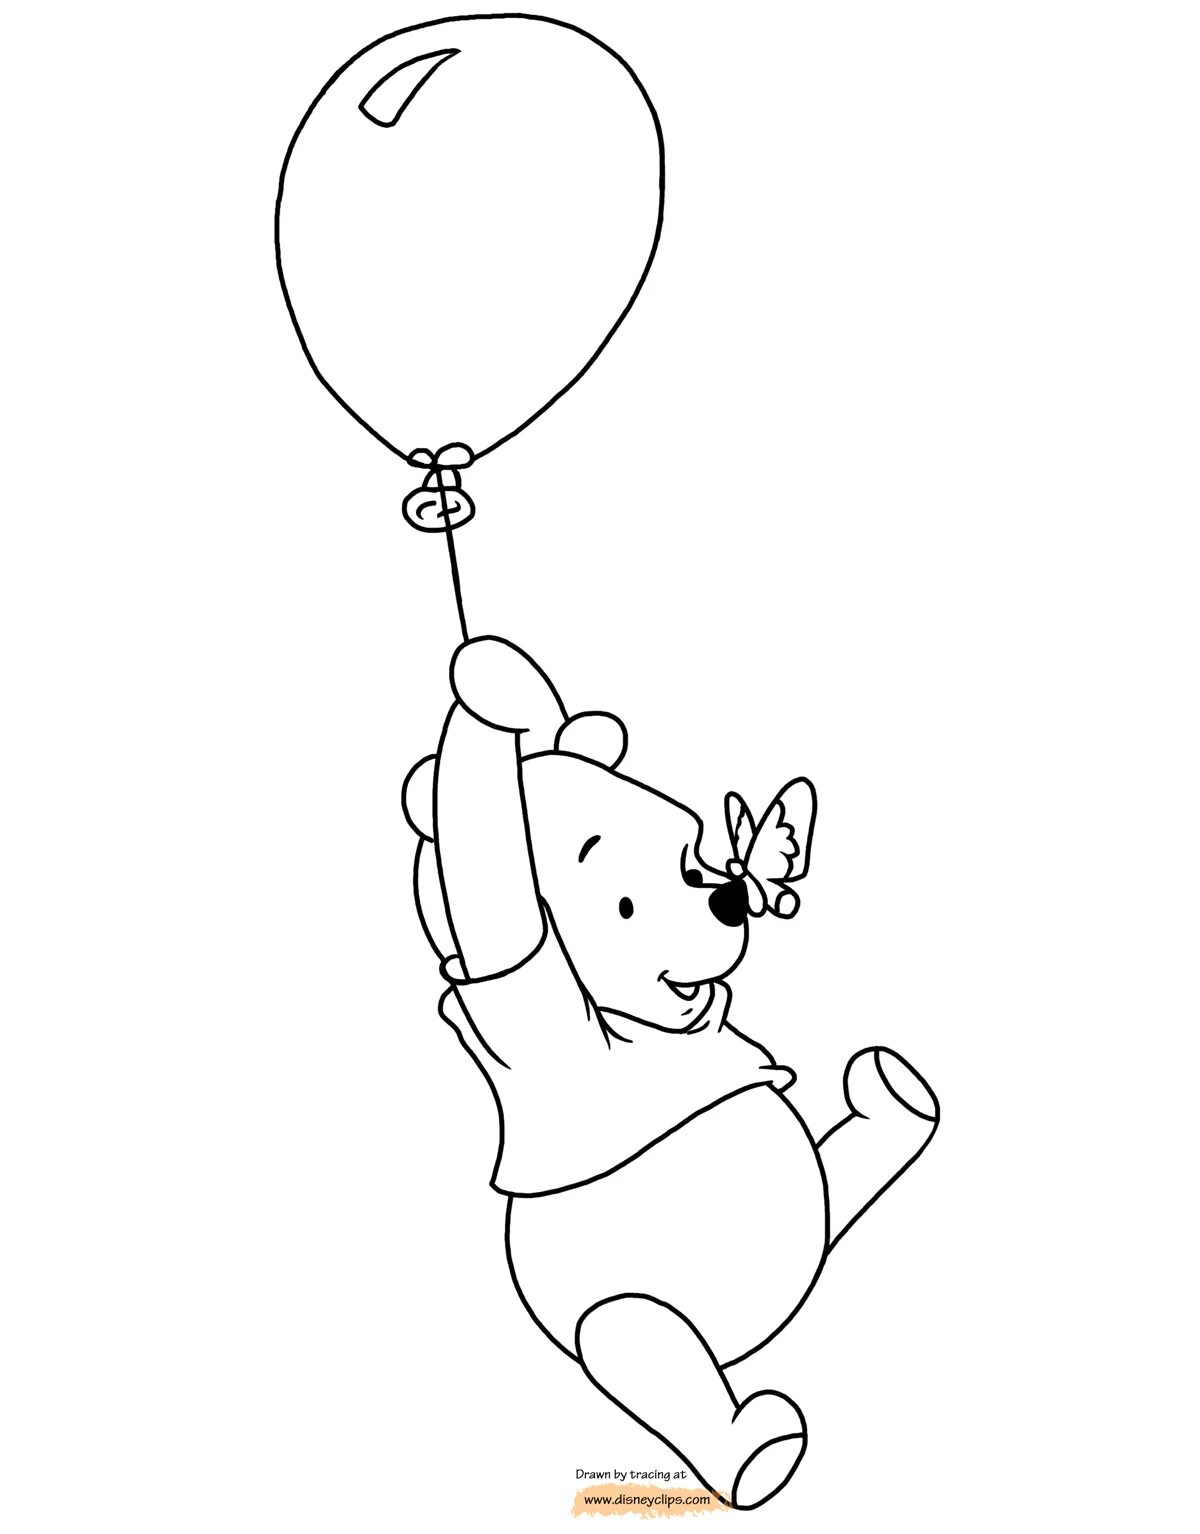 Winnie the pooh with balloon #14